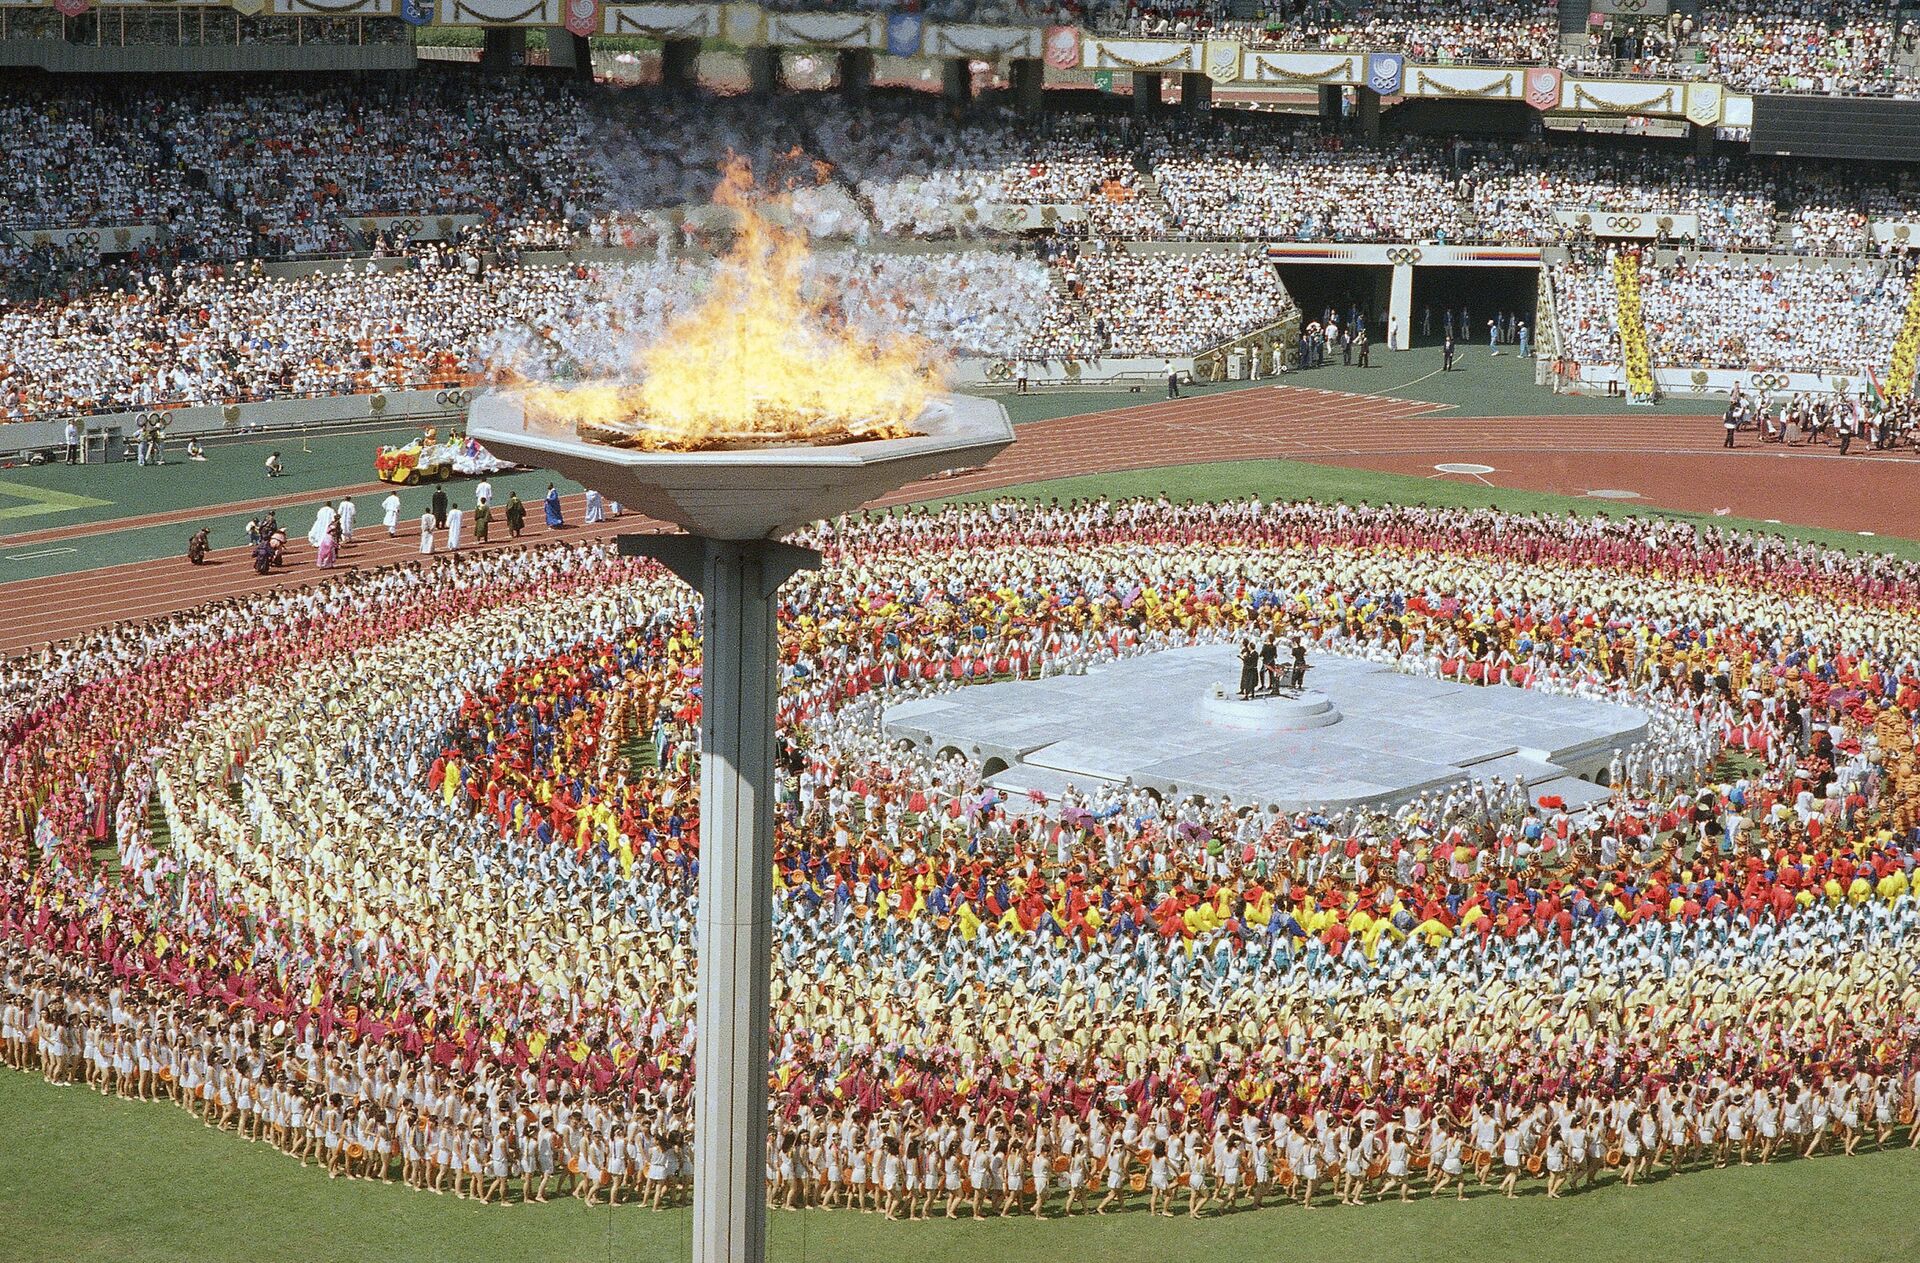 The Olympic torch towers above the Olympic stadium in Seoul Sept. 17, 1988, during the opening ceremonies for the summer Olympic Games in Seoul. (File) - Sputnik International, 1920, 27.01.2022